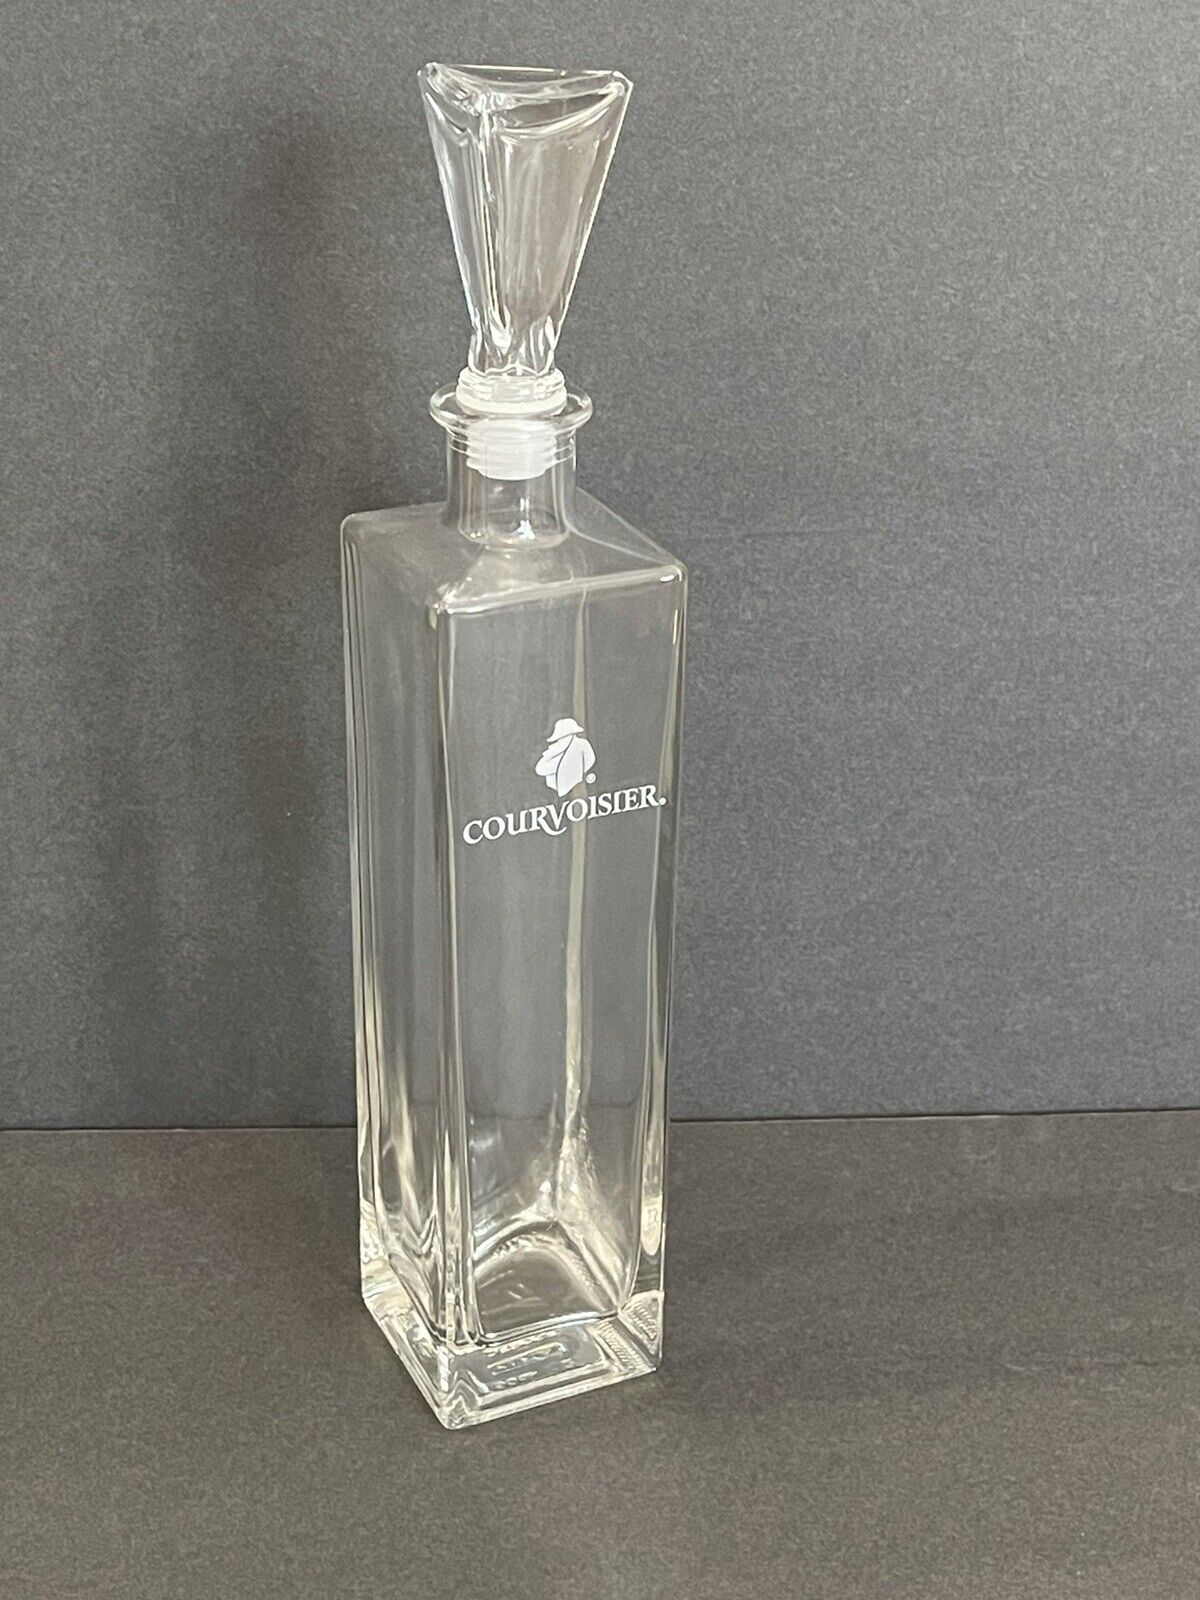 VTG COURVOISIER pyramid stopper glass bottle square etched clear decanter carafe